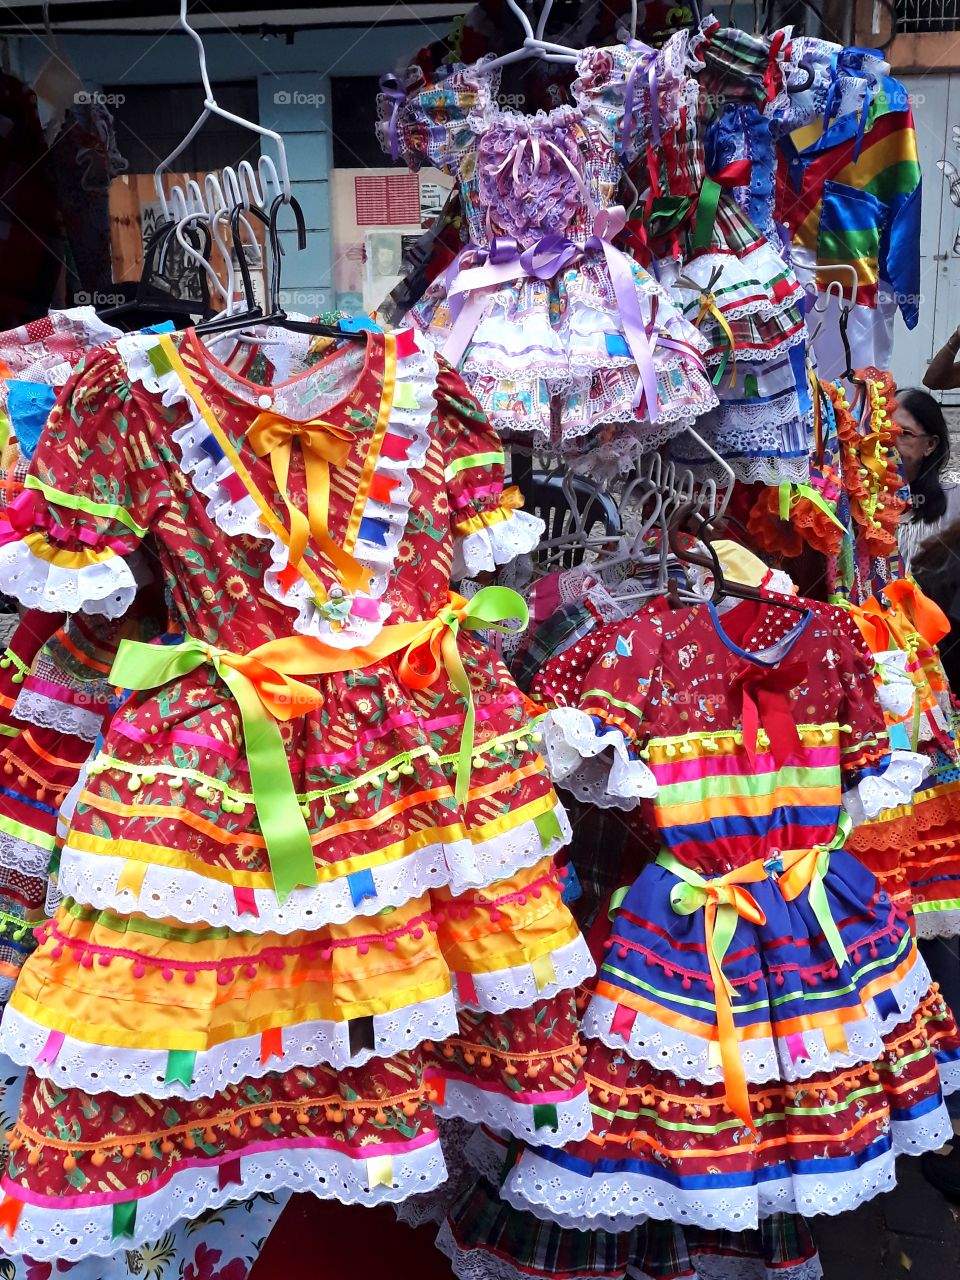 Dresses typical of the June fiestas celebrating the days of St. John and St. Peter.